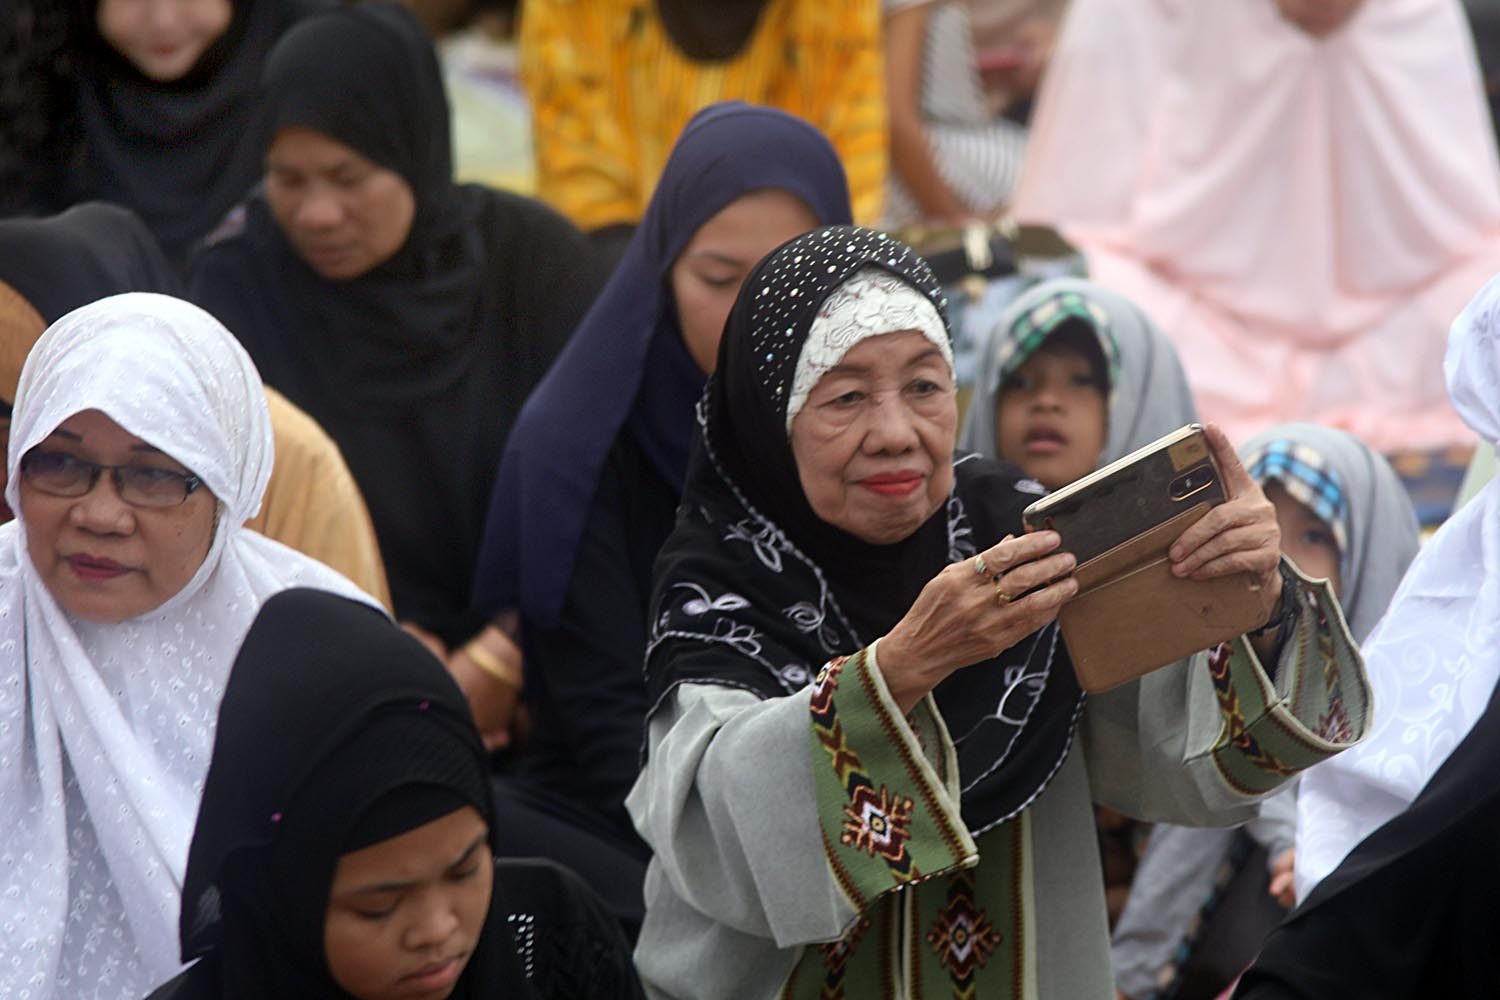 CAPTURING THE MOMENT? A woman uses her cellphone during the Eid'l Adha celebration on August 21, 2018. Photo by Darren Langit/Rappler  